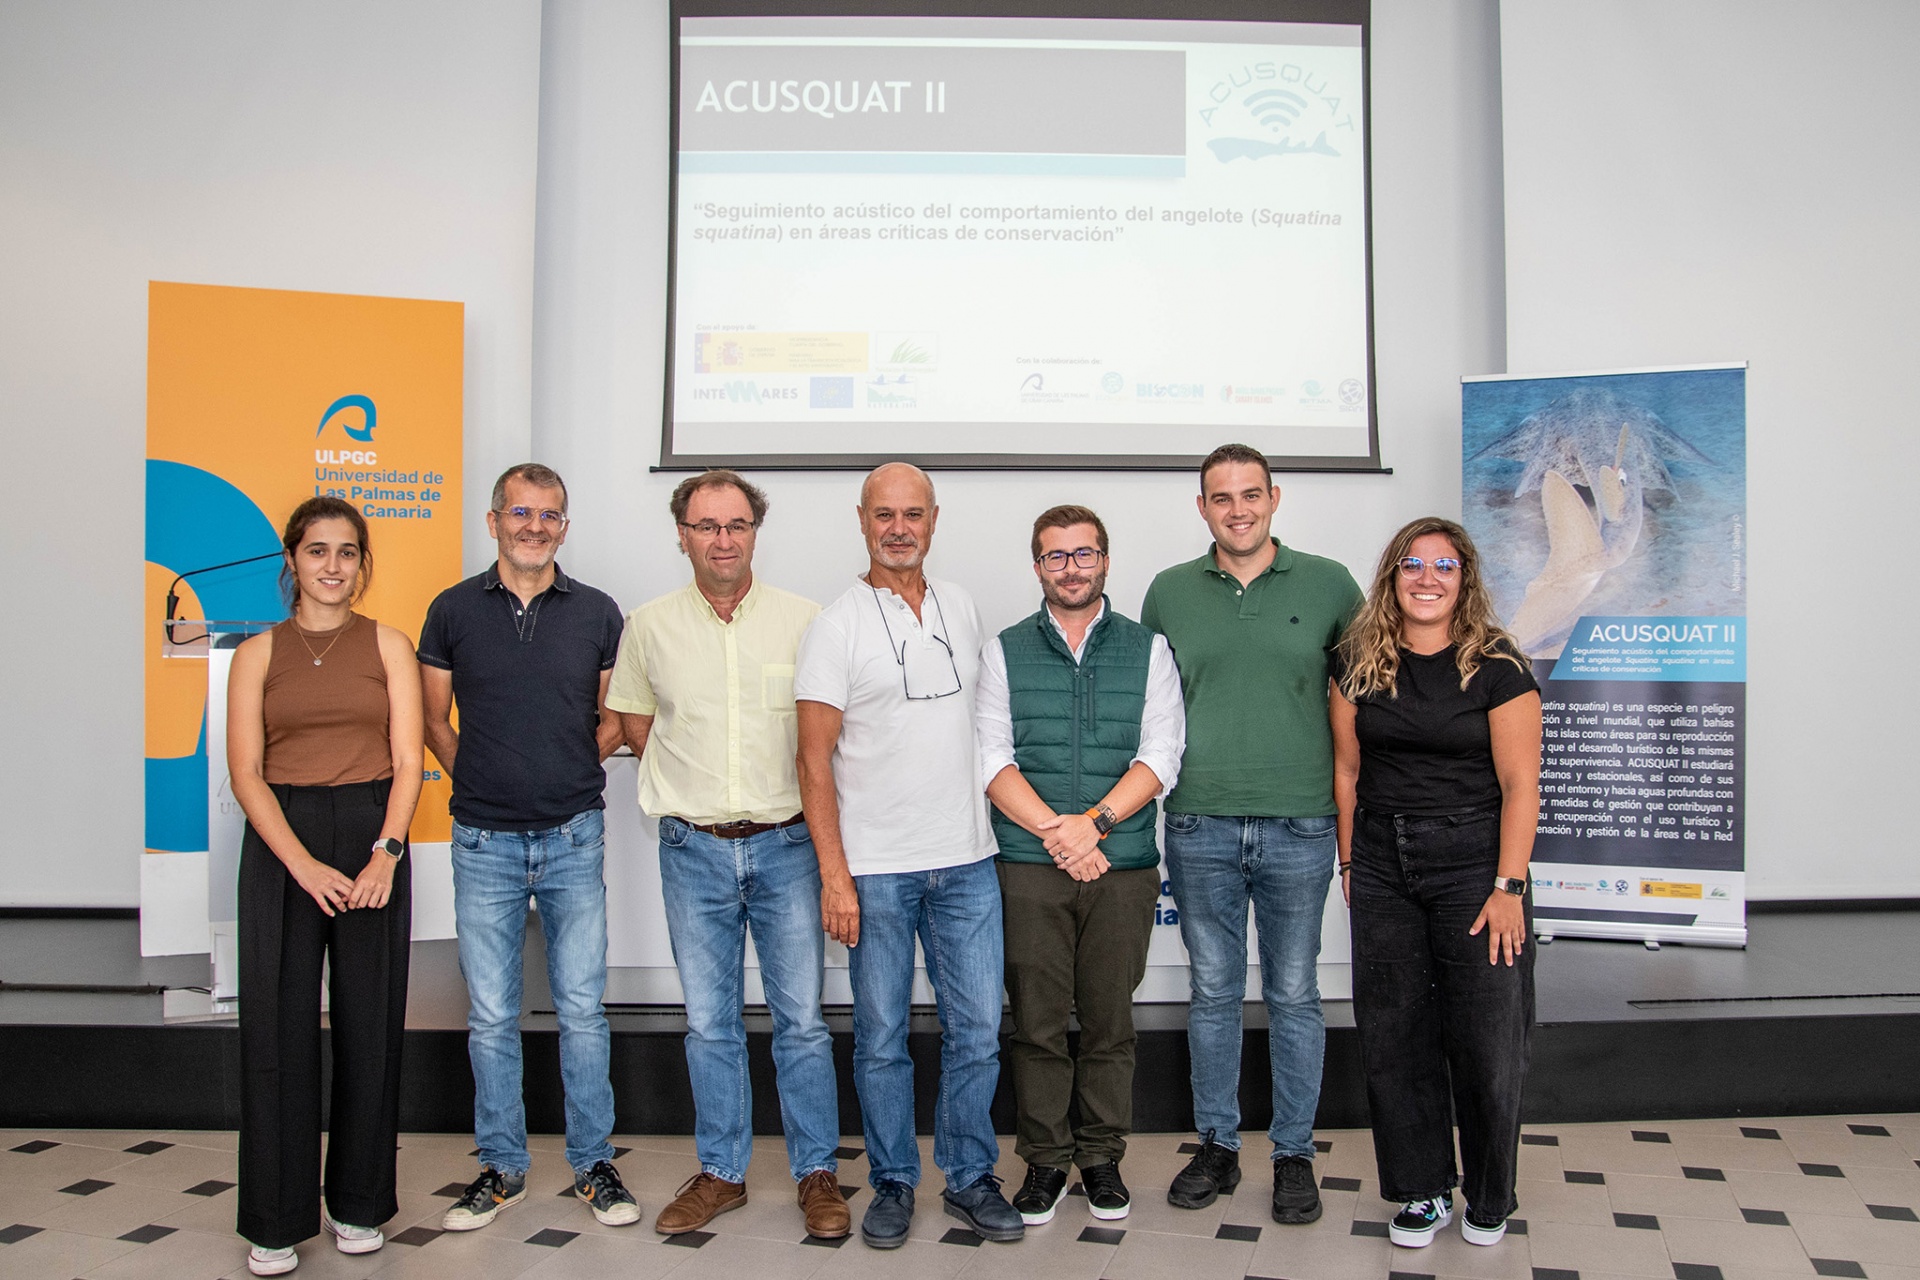 The ACUSQUAT II project lead by ULPGC, analyse the migratory patterns of the angelsharks in the Canary Islands